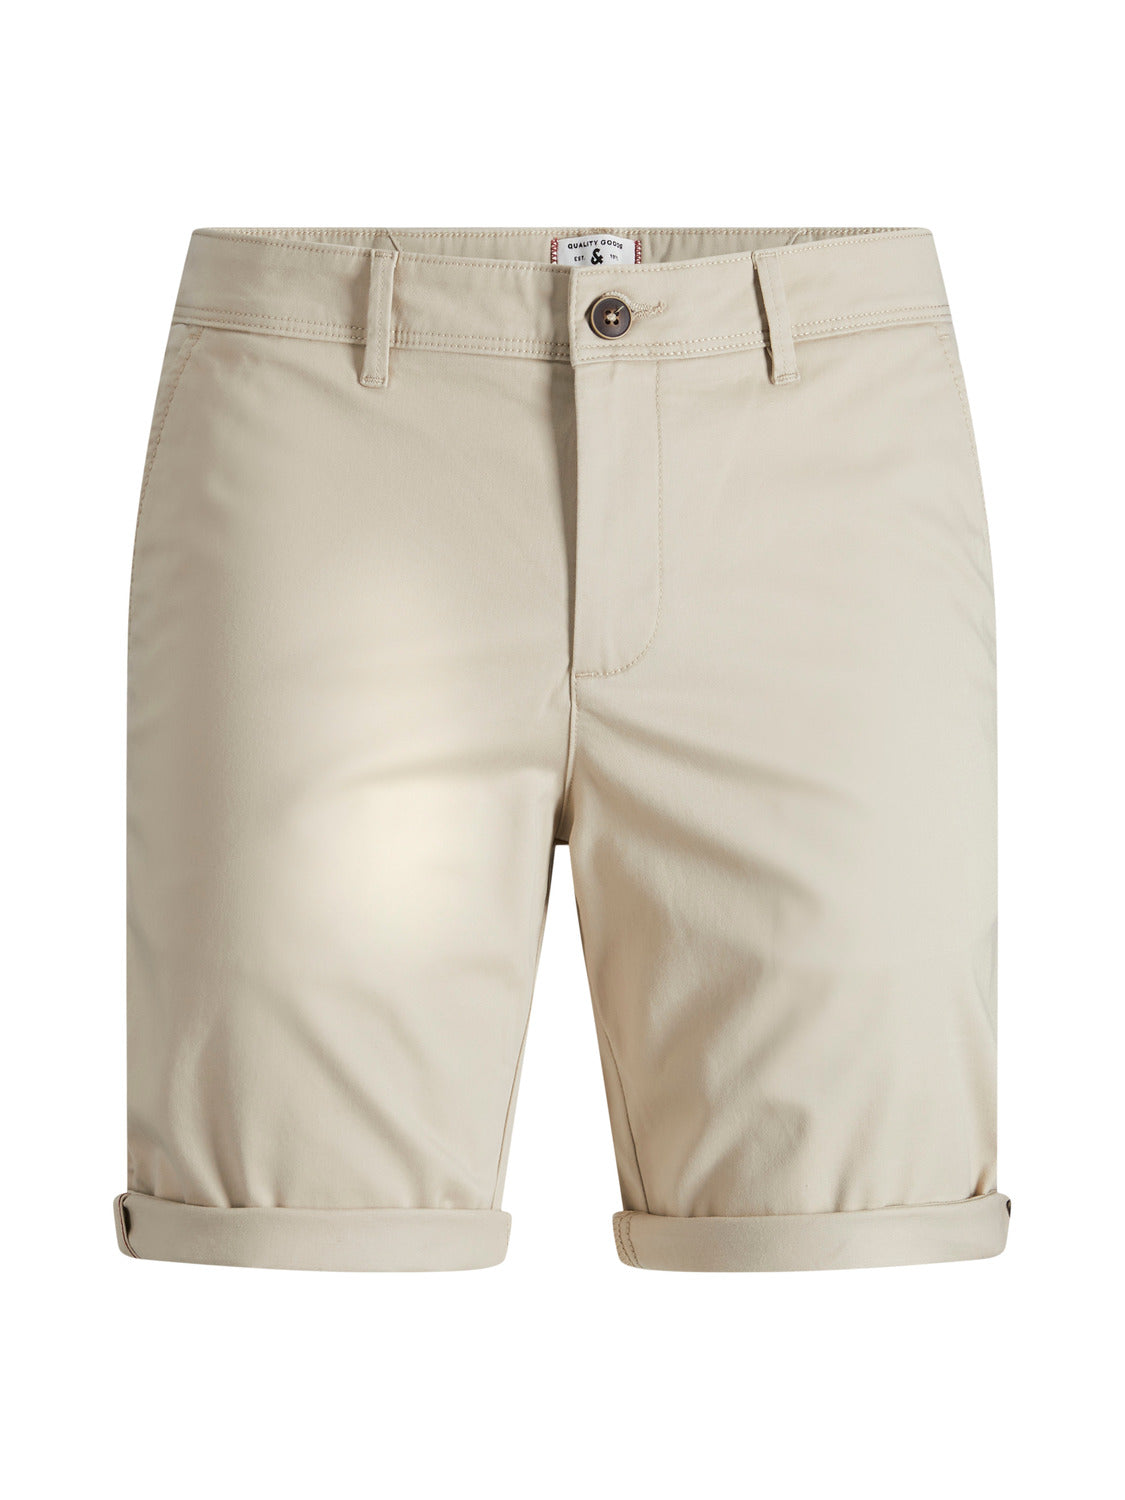 JPSTBOWIE Shorts - Oxford Tan